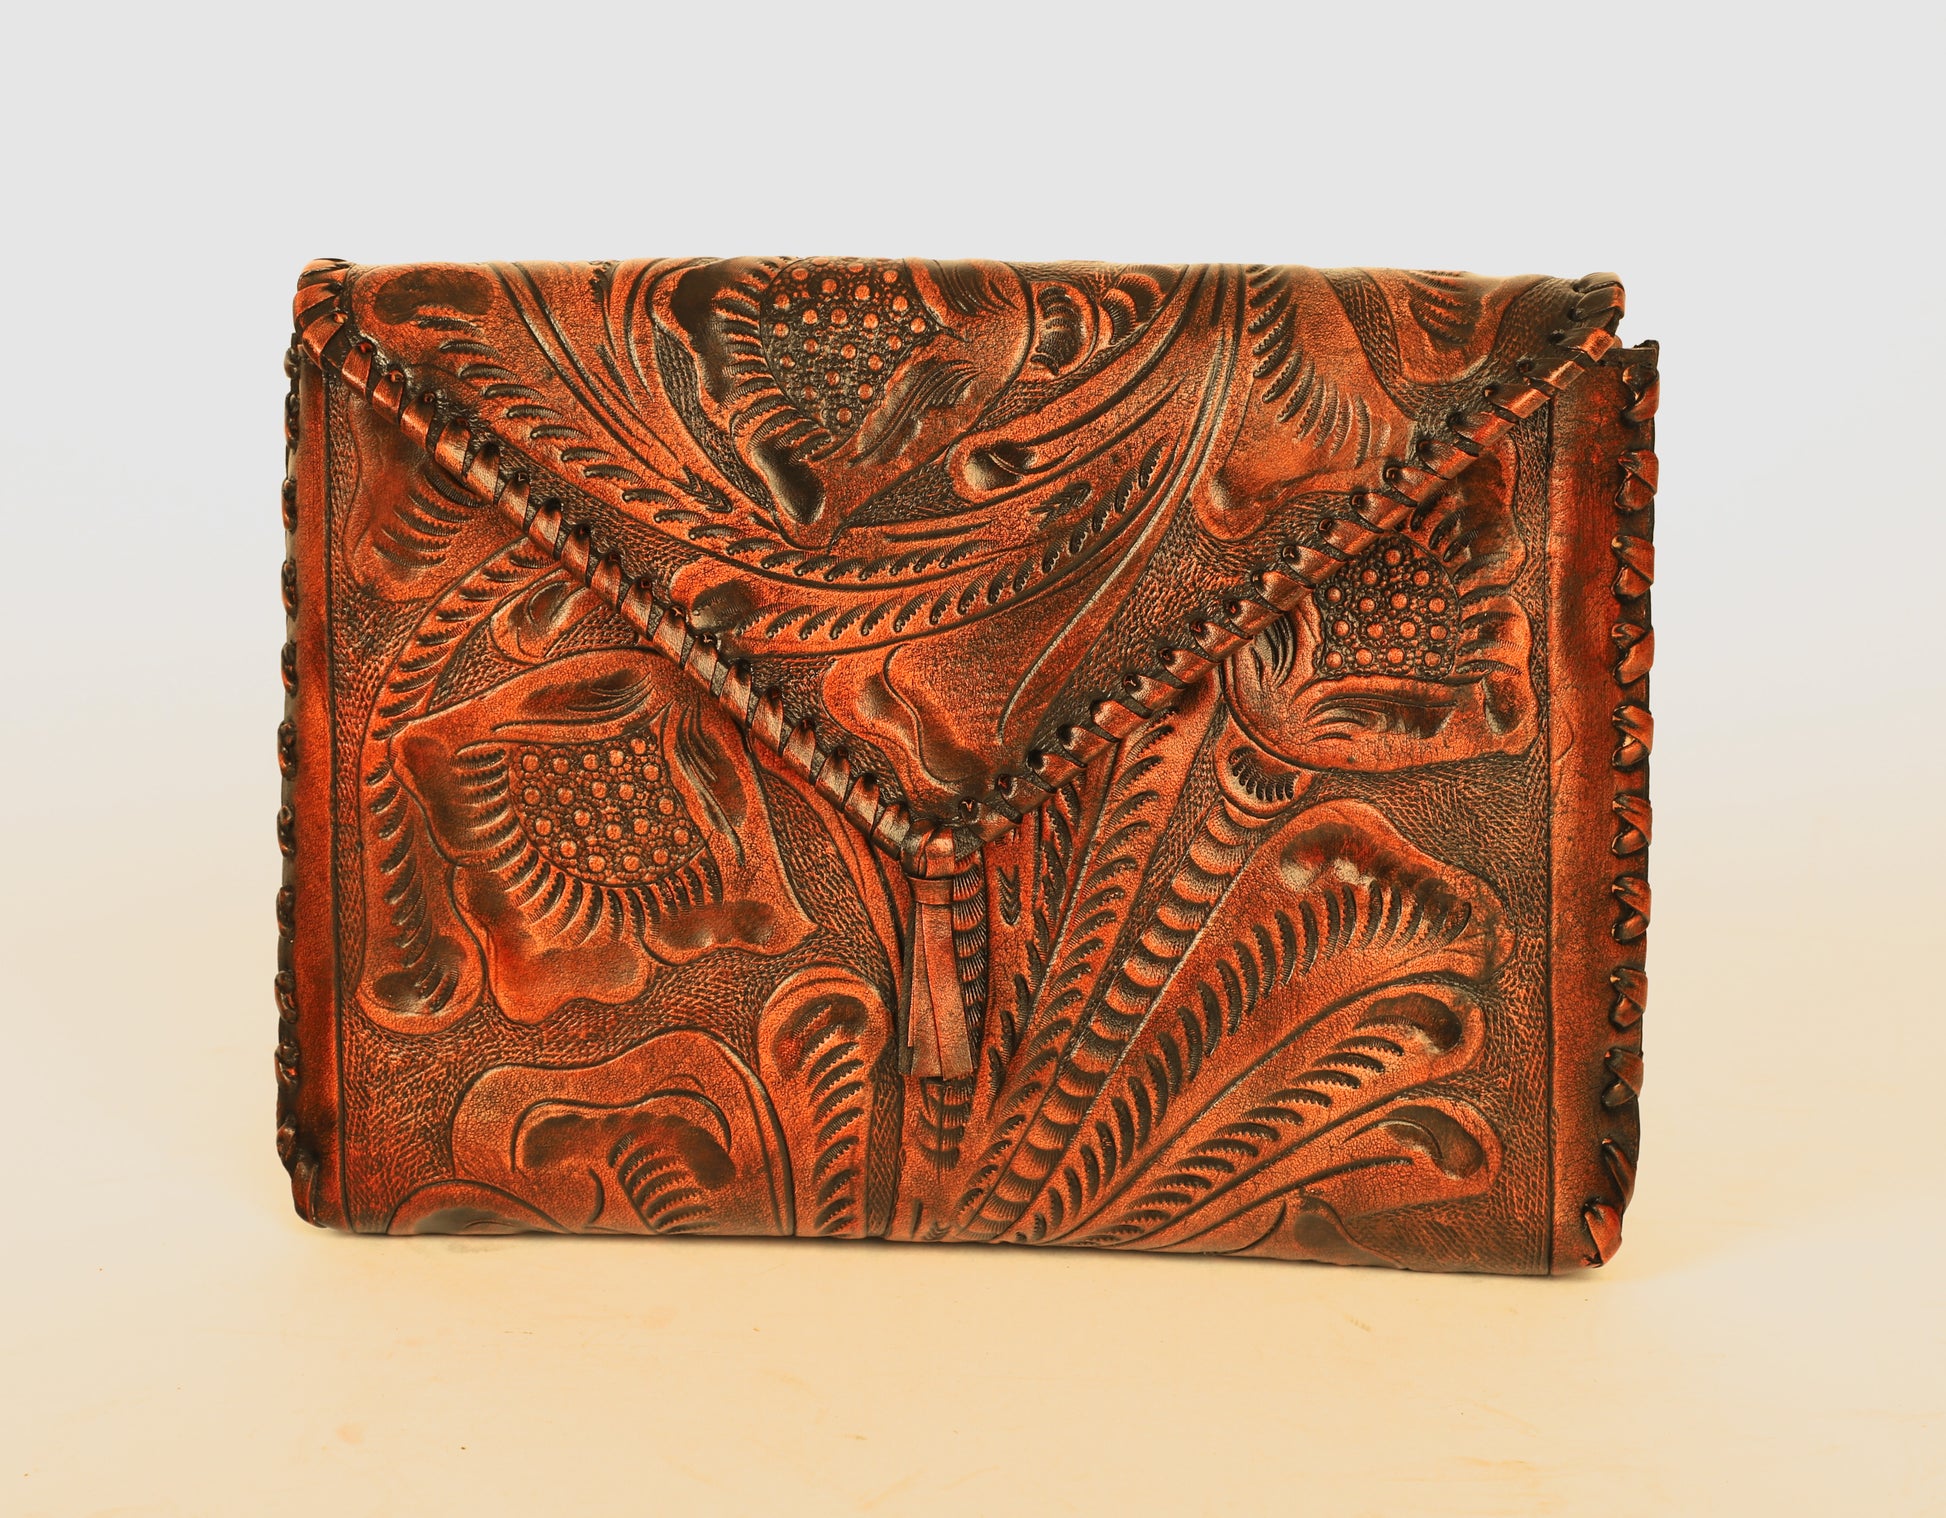 Small sized full leather crossbody bag with a triangular flap traditional mexican design on the outer flap of the purse. Fully lined with suede.  Front view of color brown fully etched clutch. 